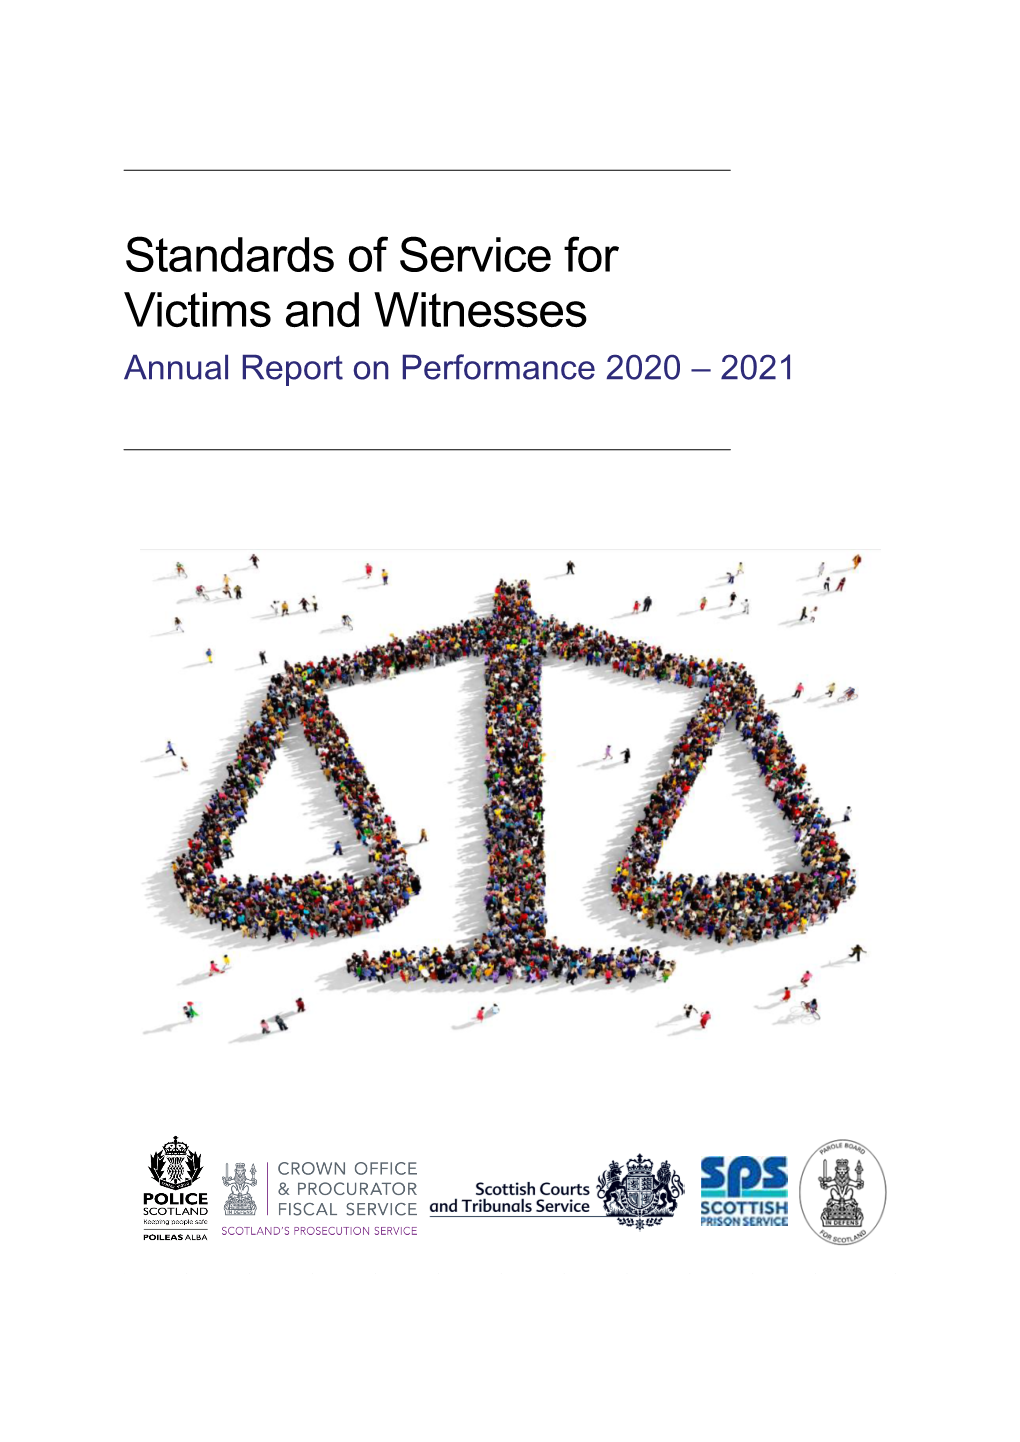 Standards of Service for Victims and Witnesses Annual Report on Performance 2020 – 2021